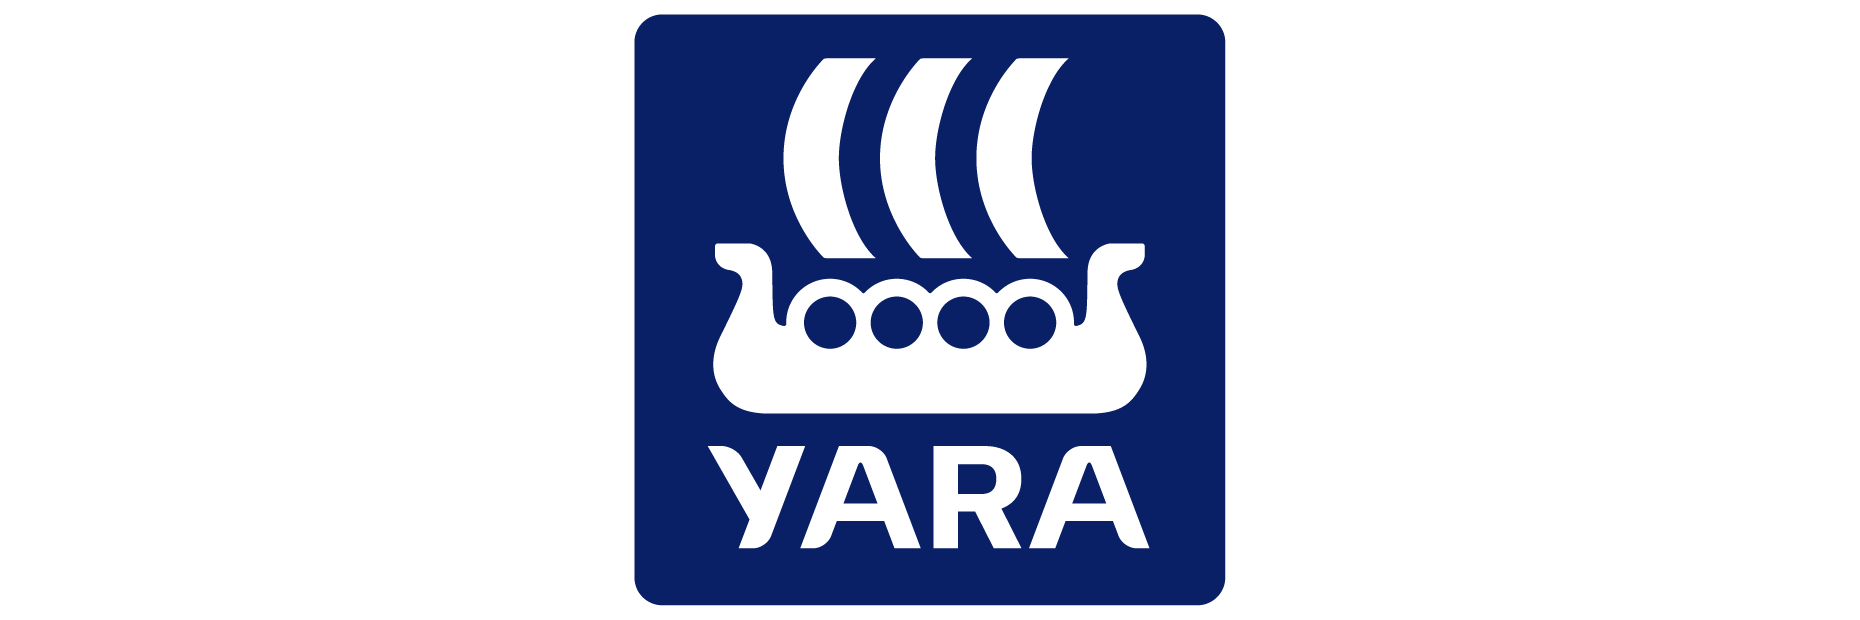 Logo of Yara one of our partners